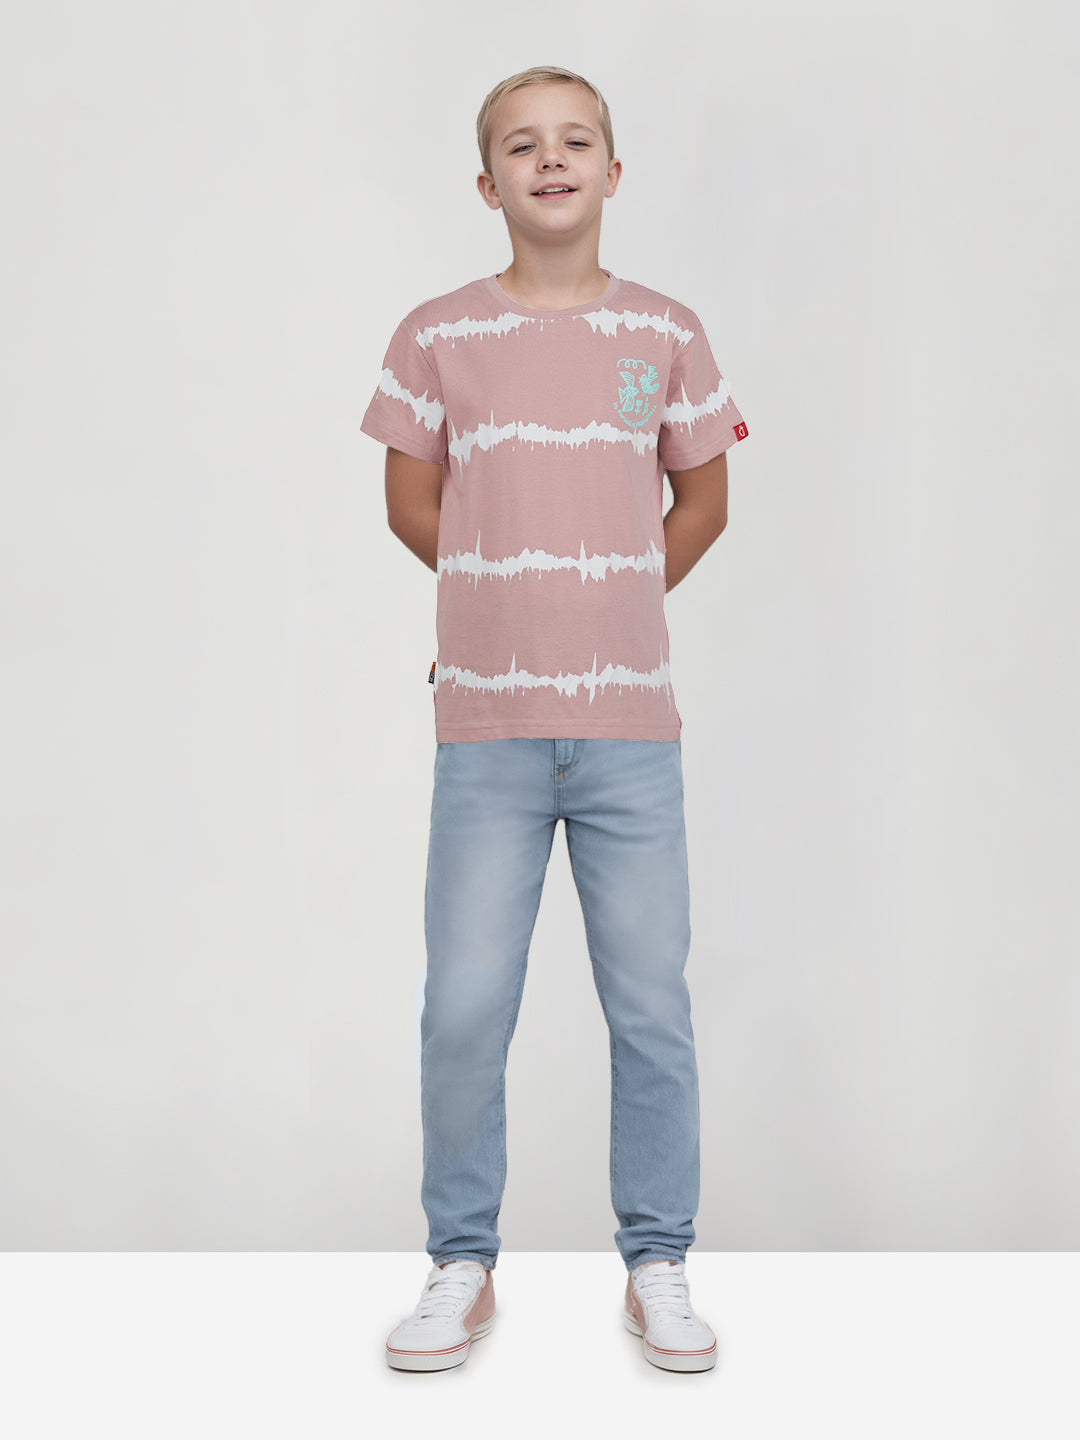 Boys pink round neck knitted cotton printed t-shirt